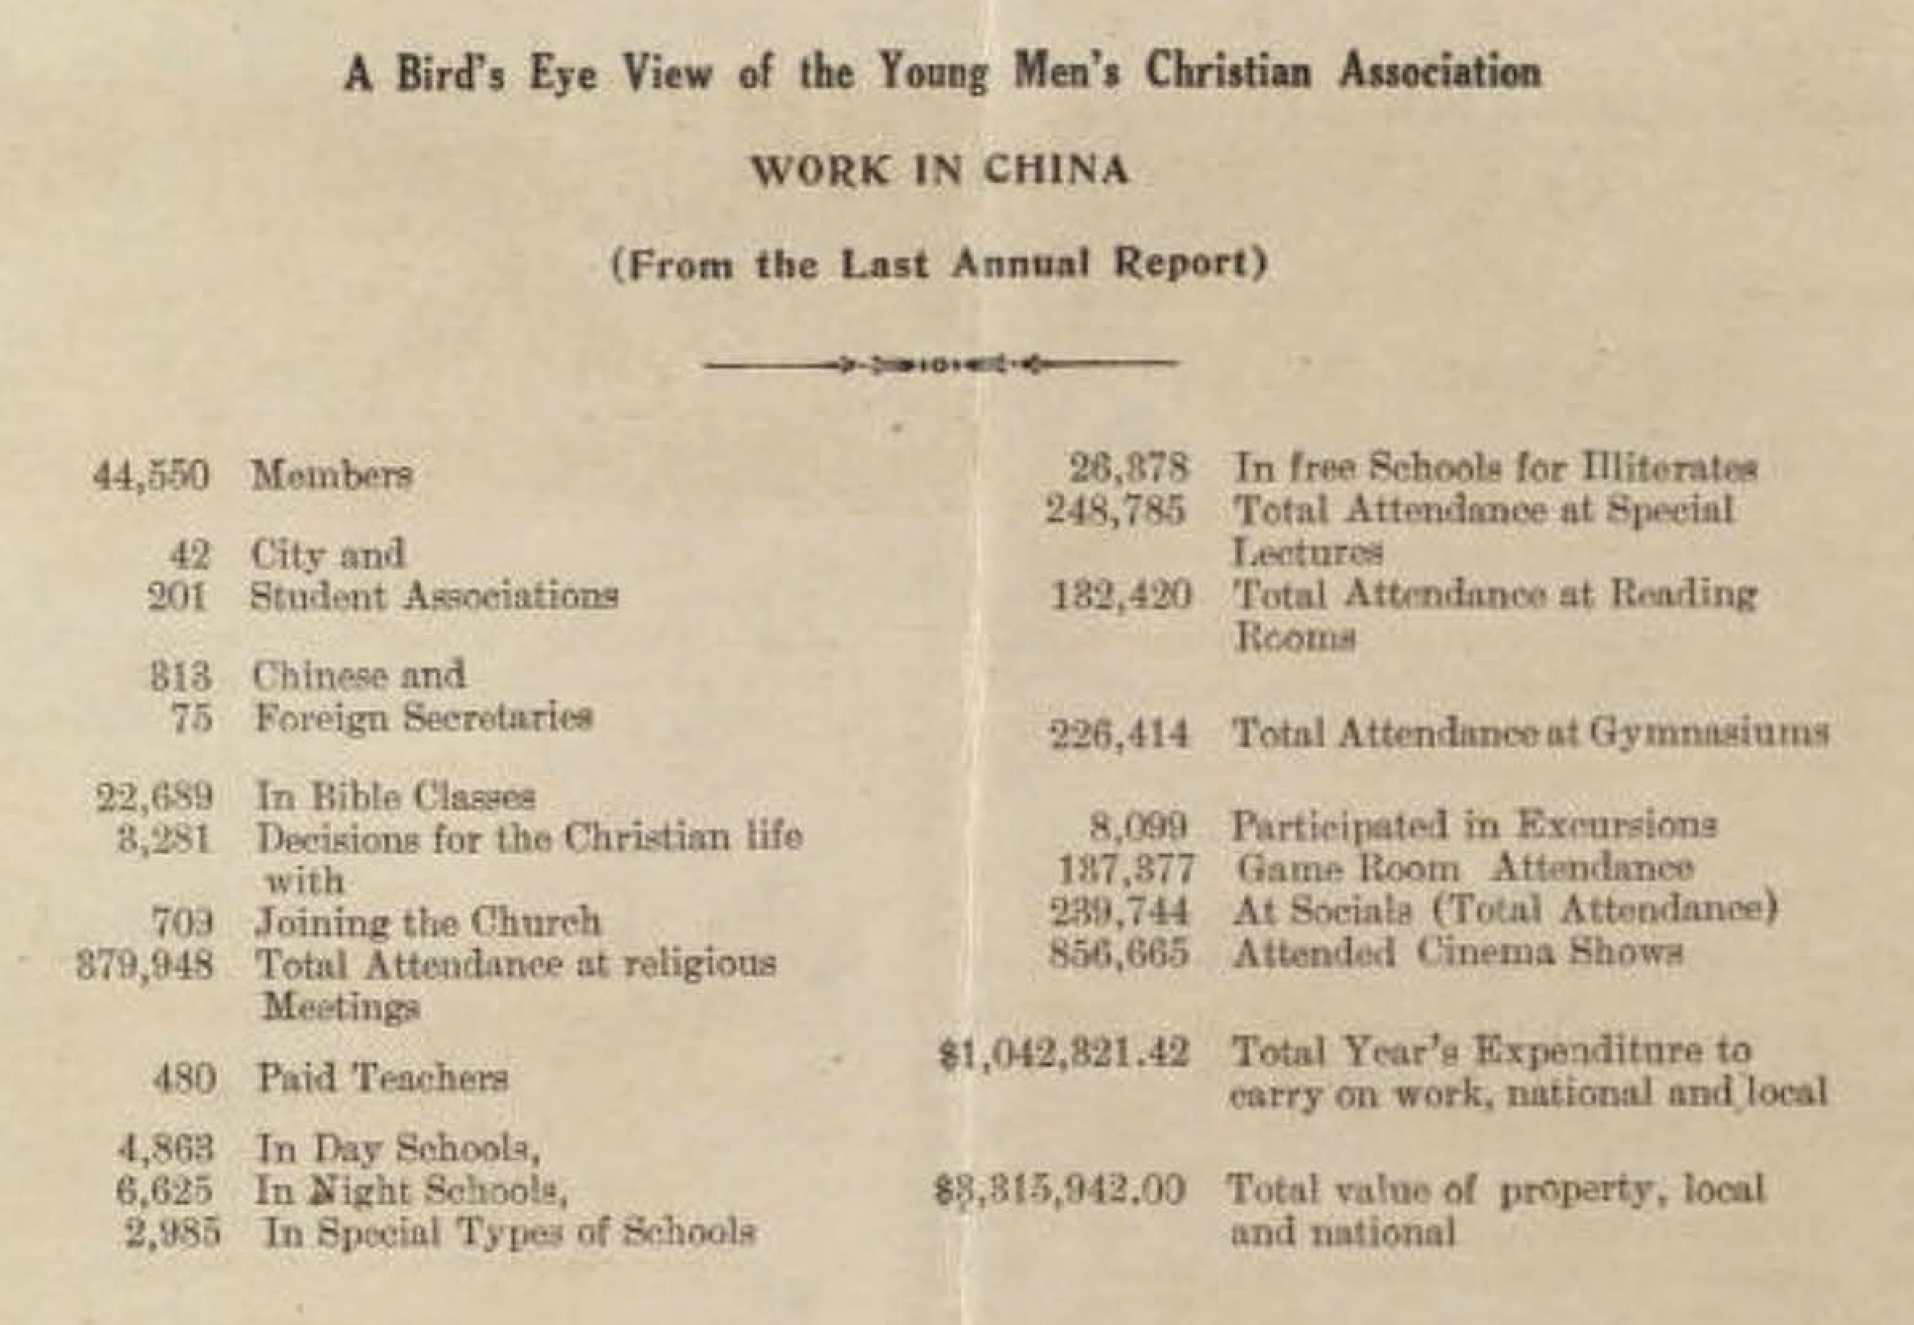 Constructive Activities of the Young Men's Christian Associations of China, 1925. (Dec. 01, 1925). Annual and Quarterly Reports of the YMCAs of China, Korea, and Hong Kong, 1902-1904, Box 18, Folder 4, PDF p. 14. Univ. of Minnesota, Kautz Family YMCA Archives.